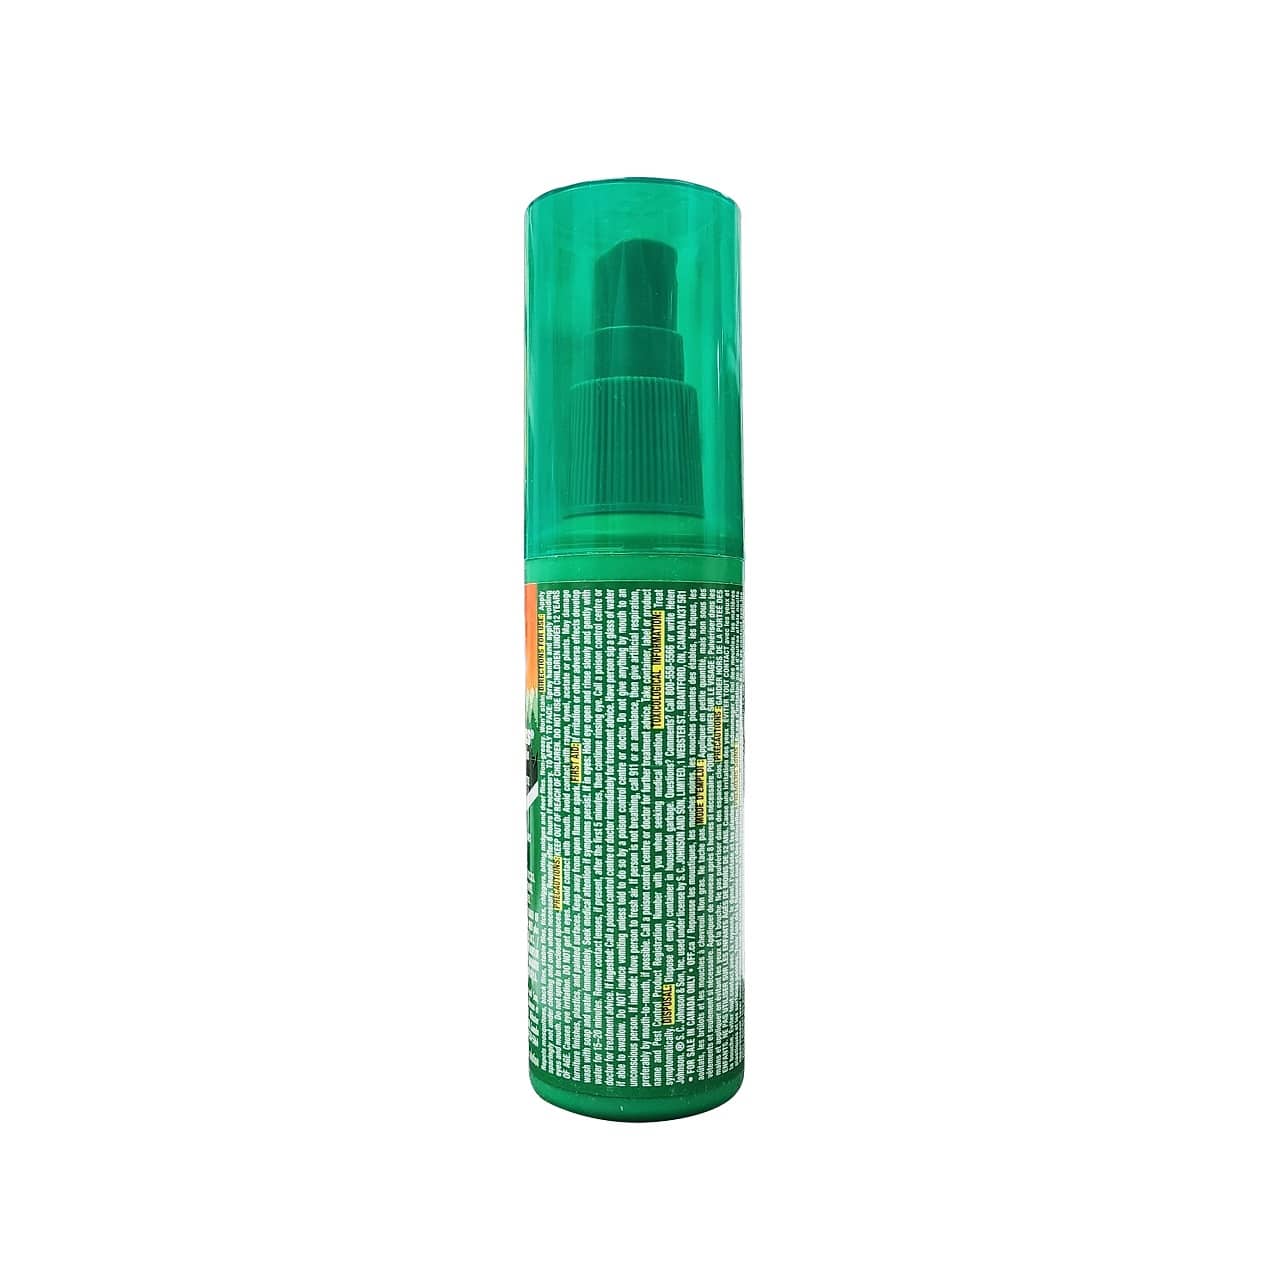 Description, precautions, first aid, disposal for Off! Deep Woods Pump Spray Insect Repellent (100 mL) in English